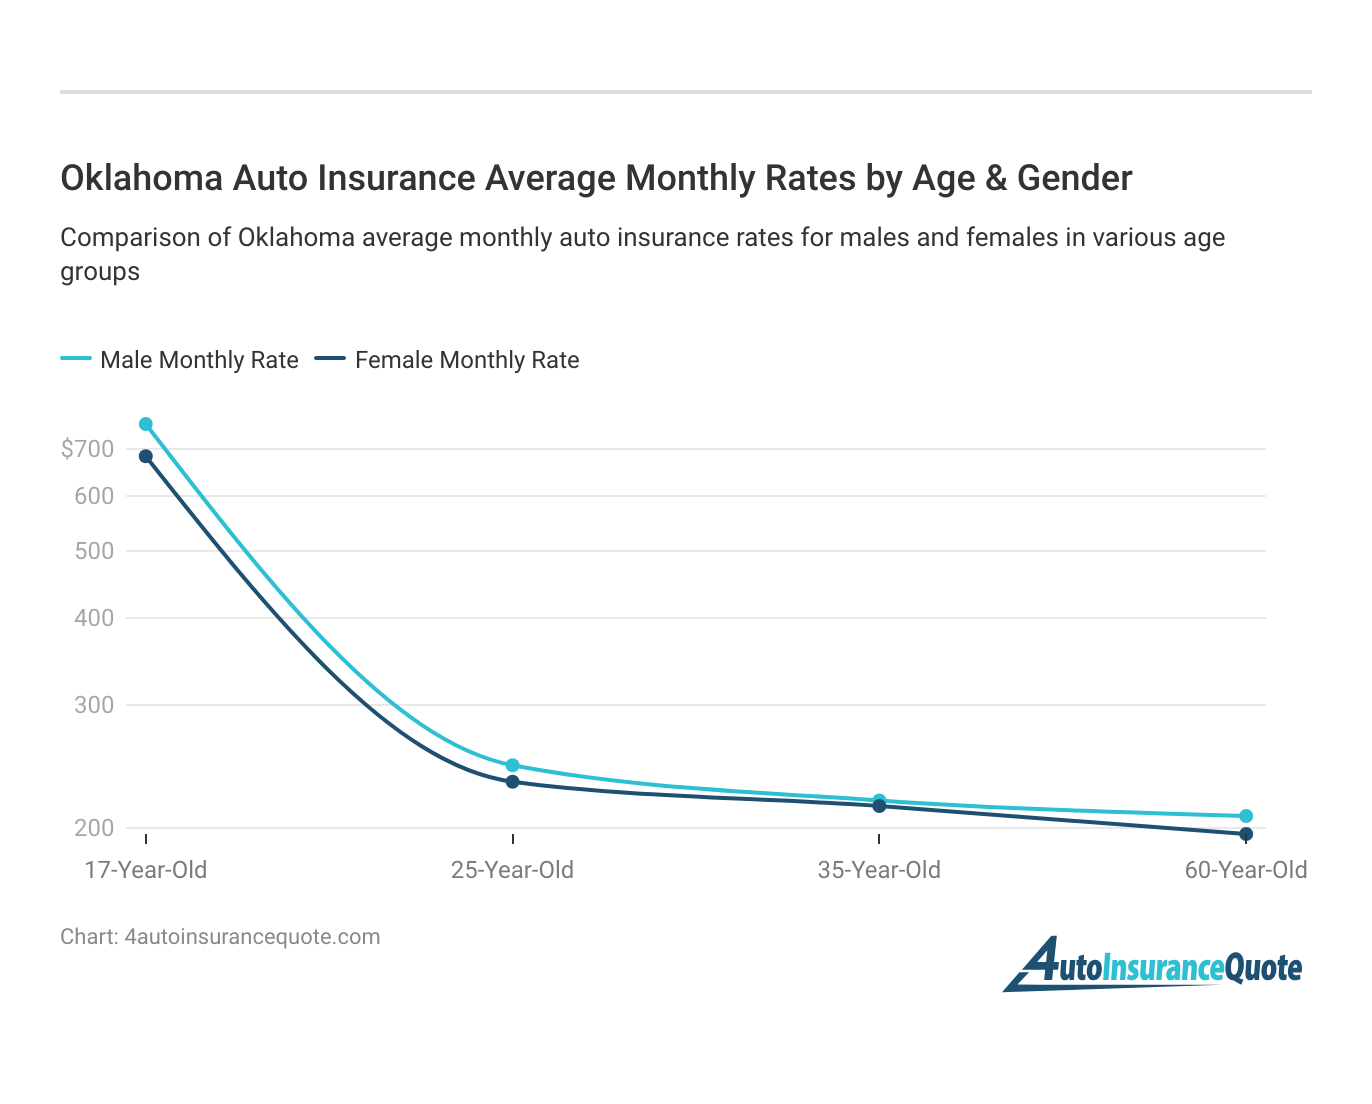 <h3>Oklahoma Auto Insurance Average Monthly Rates by Age & Gender</h3>